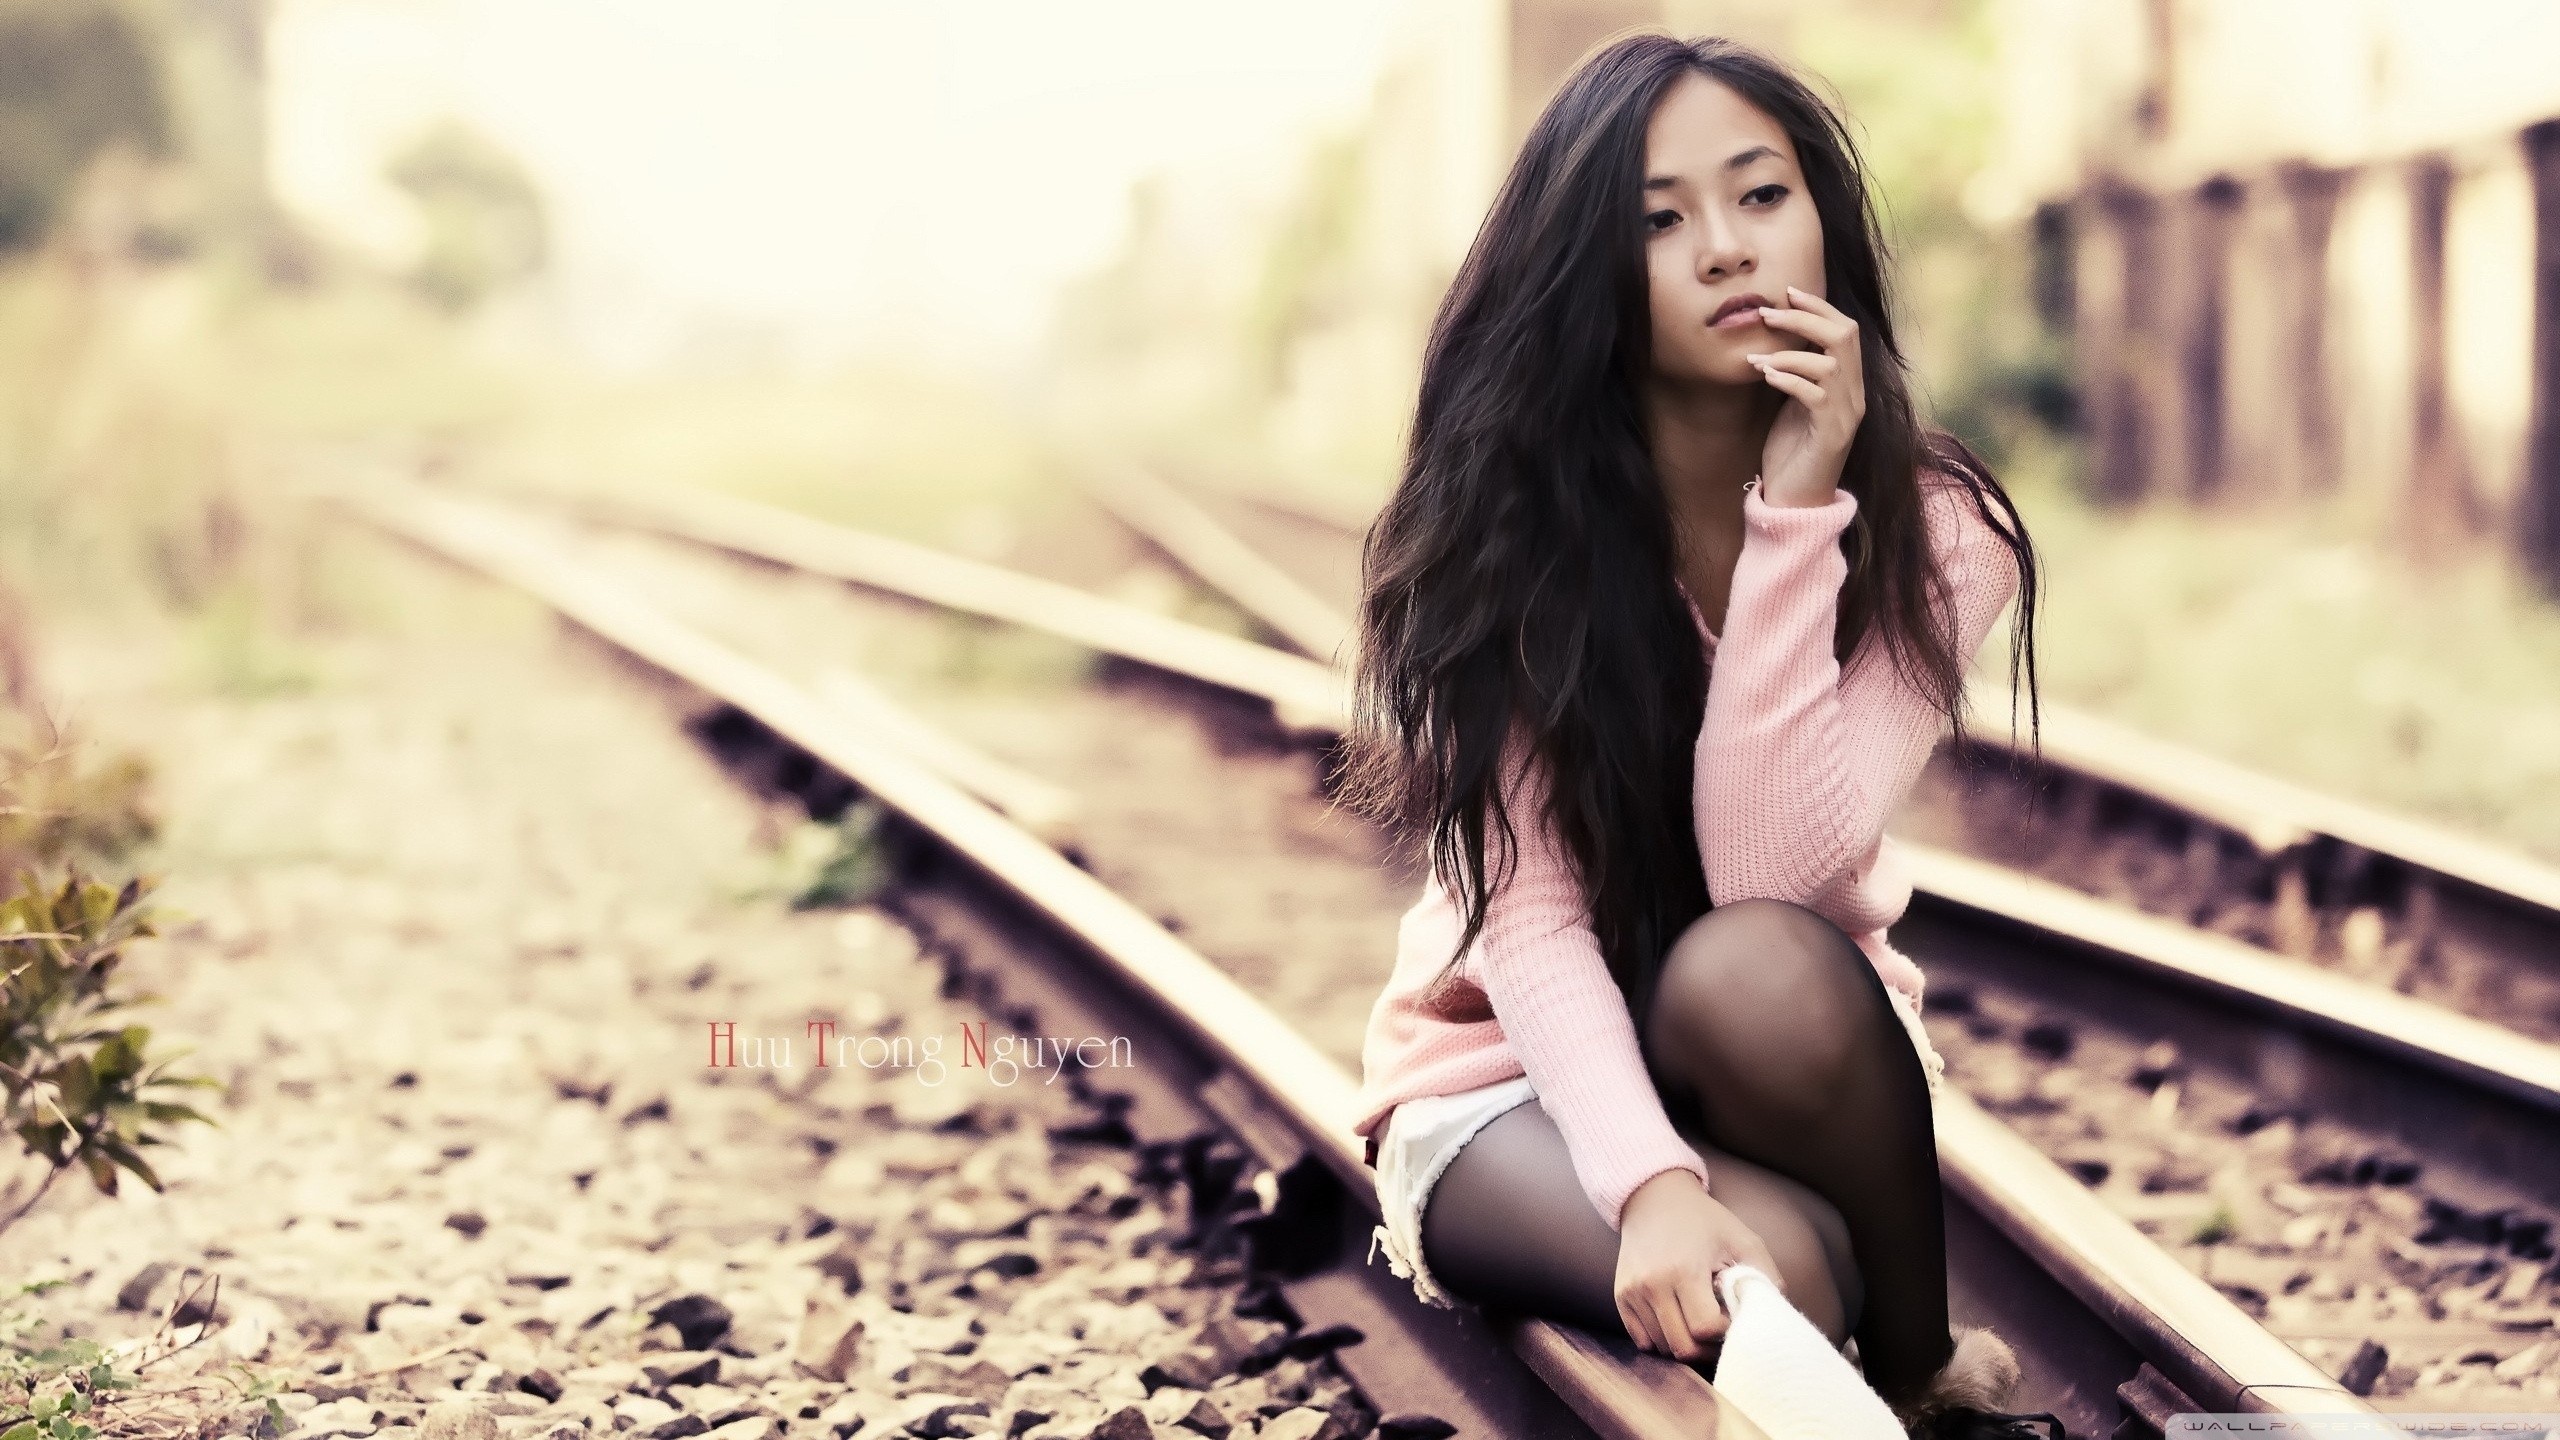 People 2560x1440 railway Asian women women outdoors Huu Trong Nguyen outdoors looking into the distance sitting dark hair legs together sweater jean shorts